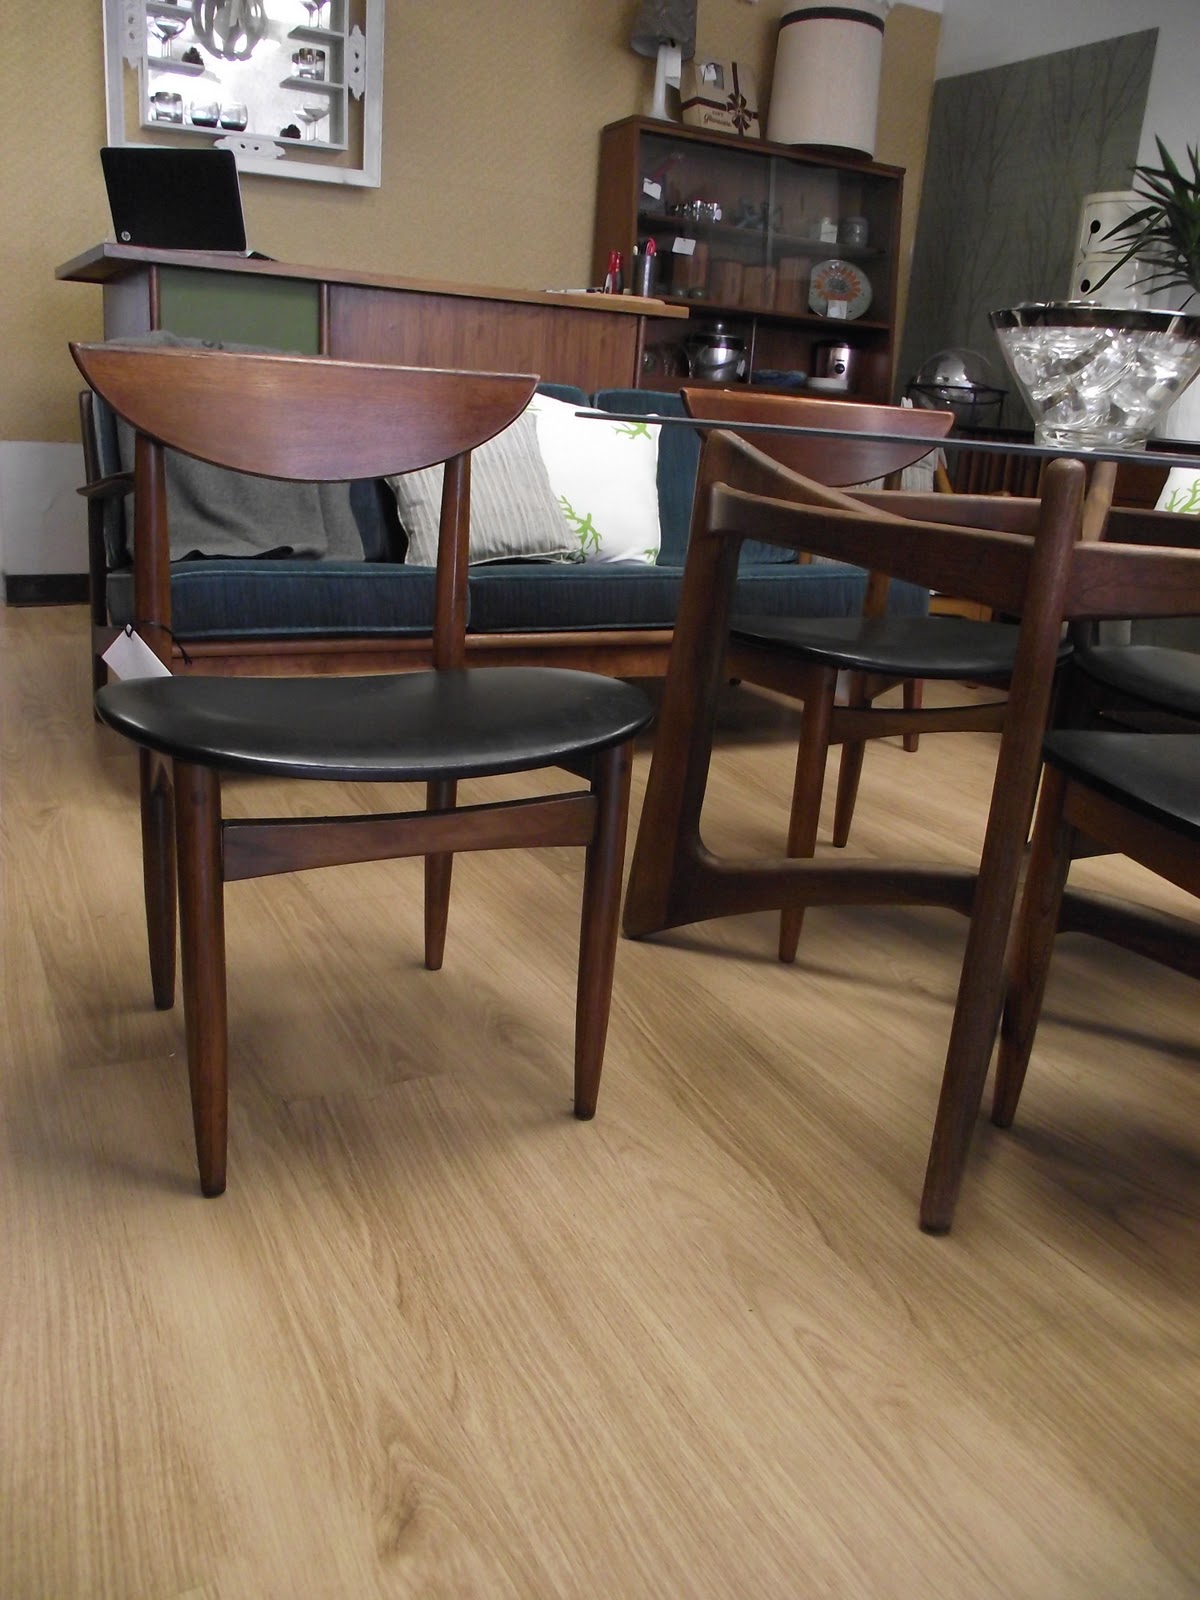 Dining Table For 8 Persons